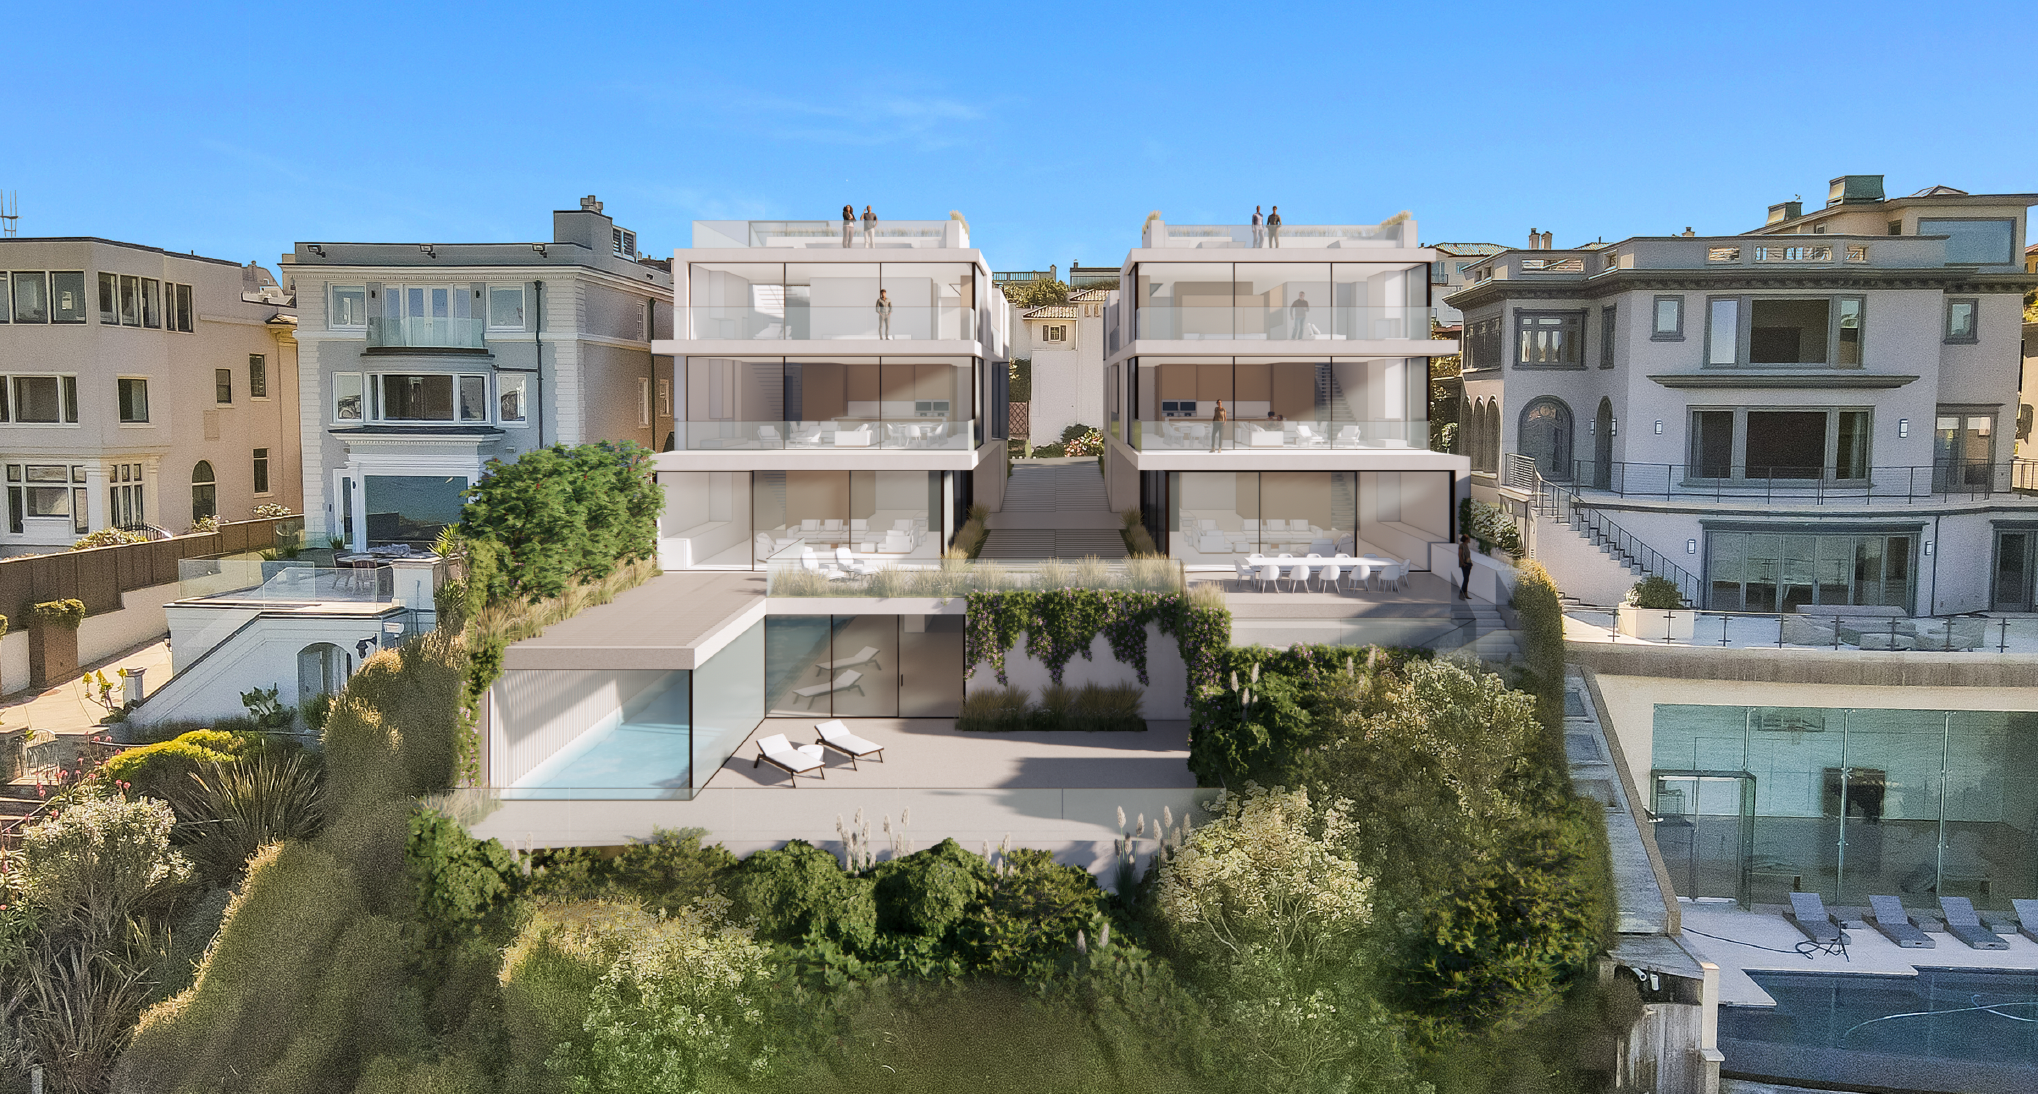 San Francisco Sea Cliff’s ‘Very Boxy’ Mansion Plans Leave Locals Unimpressed